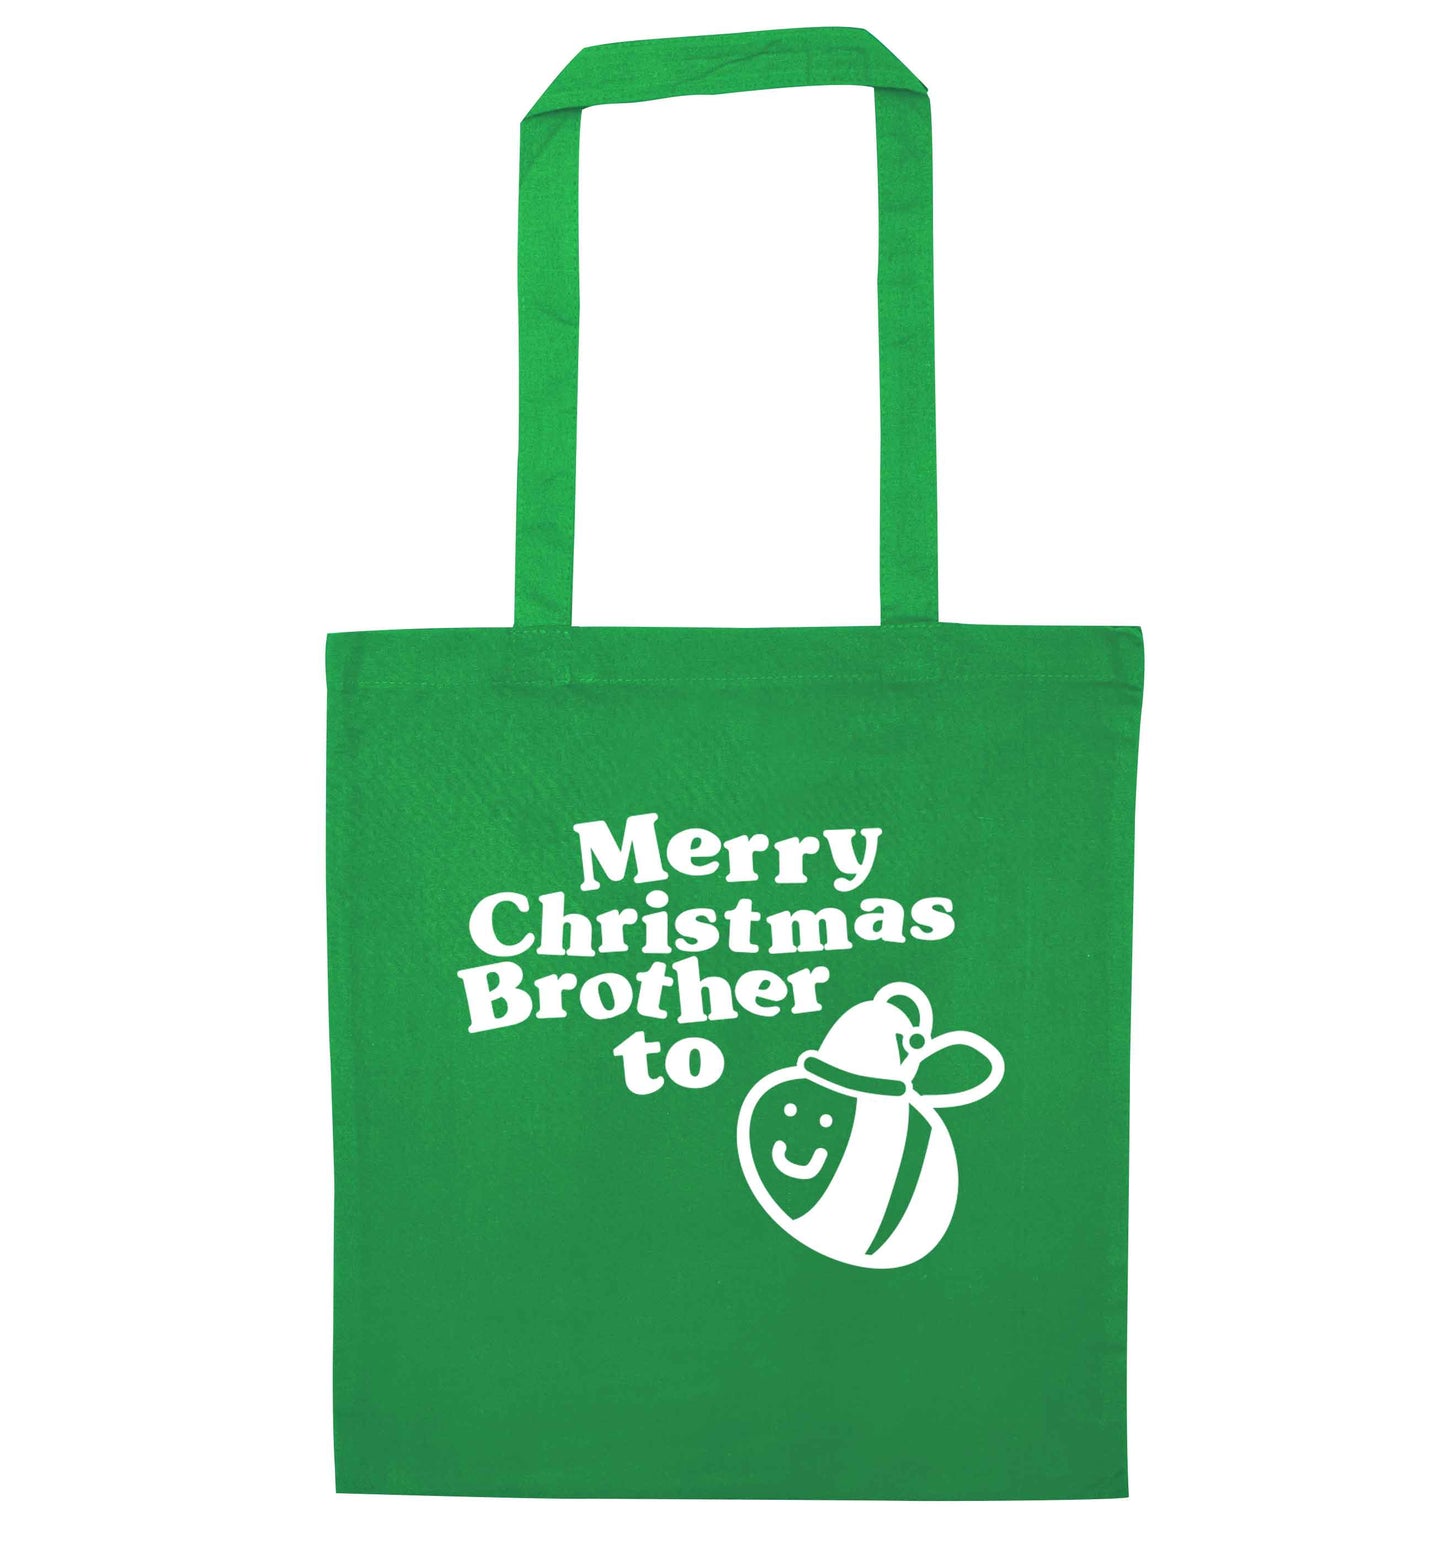 Merry Christmas brother to be green tote bag